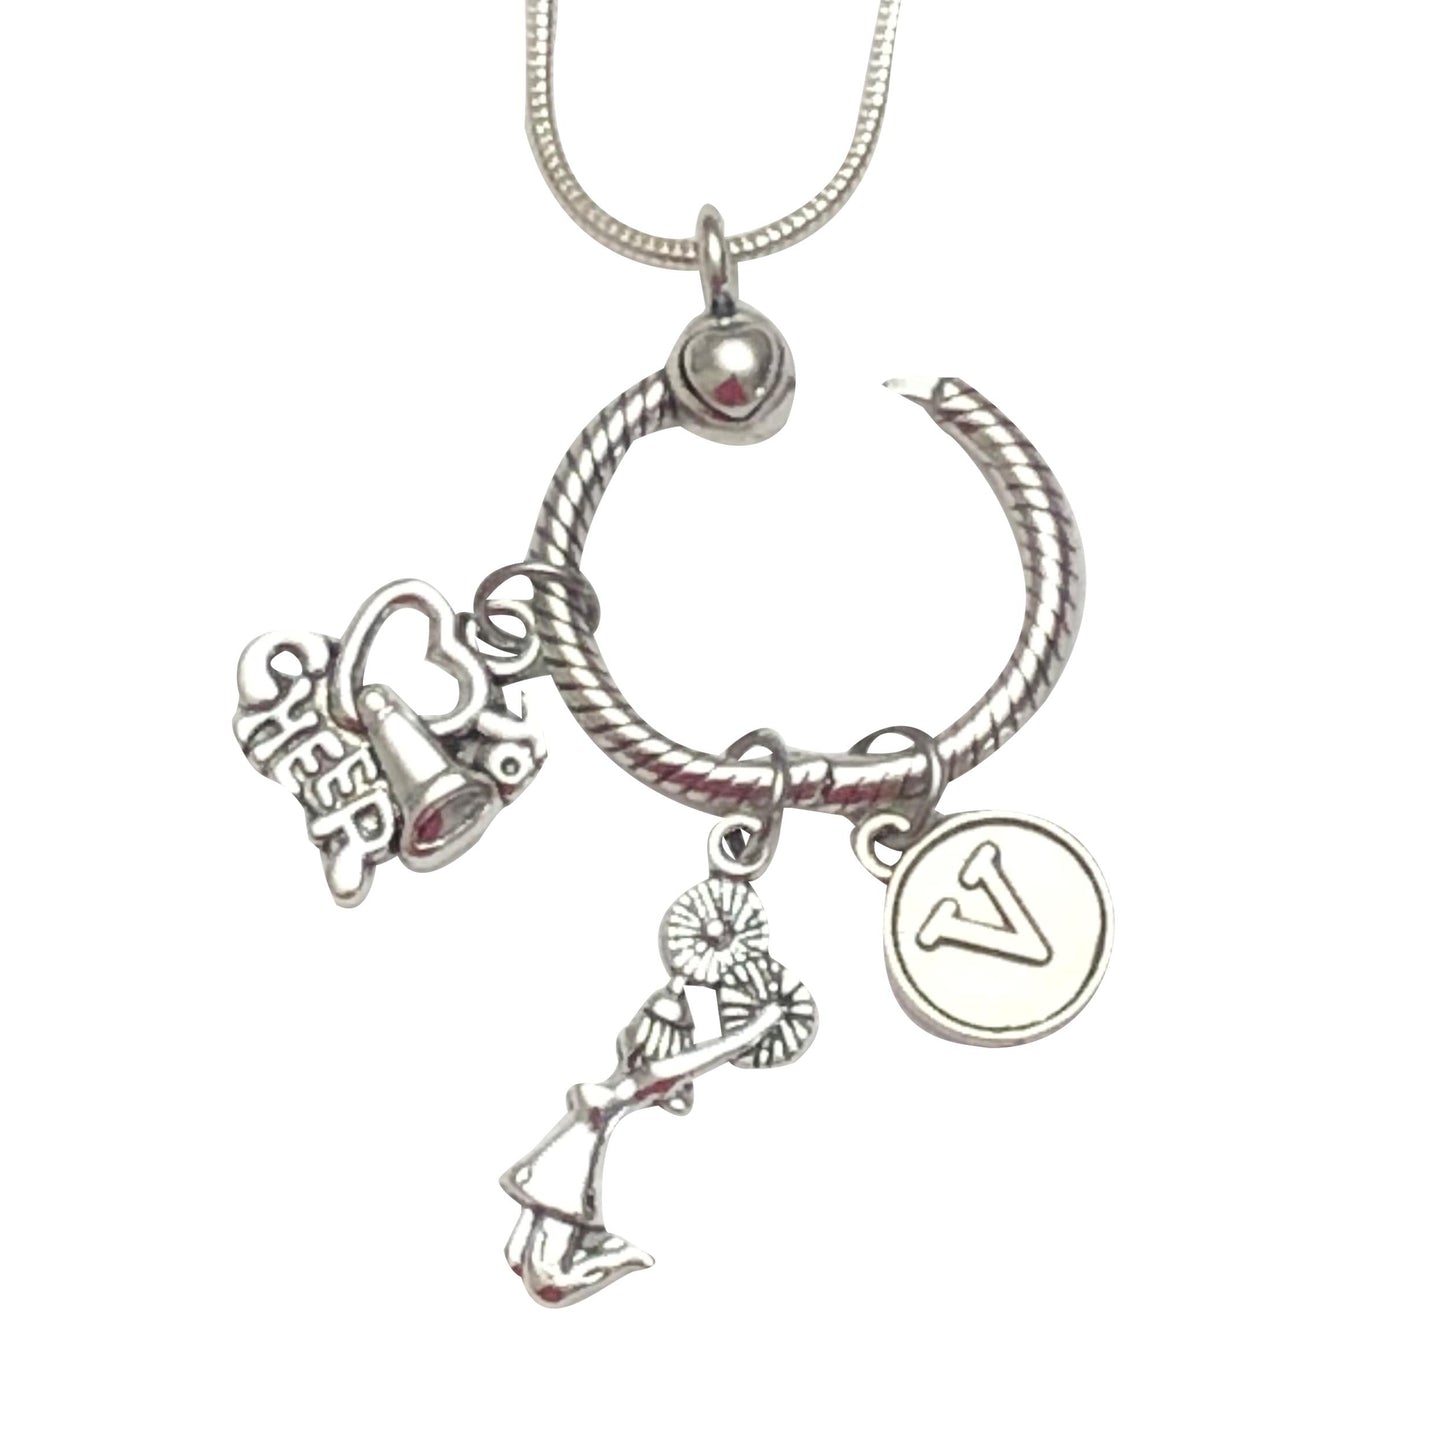 Cheerleading Sterling Silver Necklace with Charm Holder - Cheer and Dance On Demand